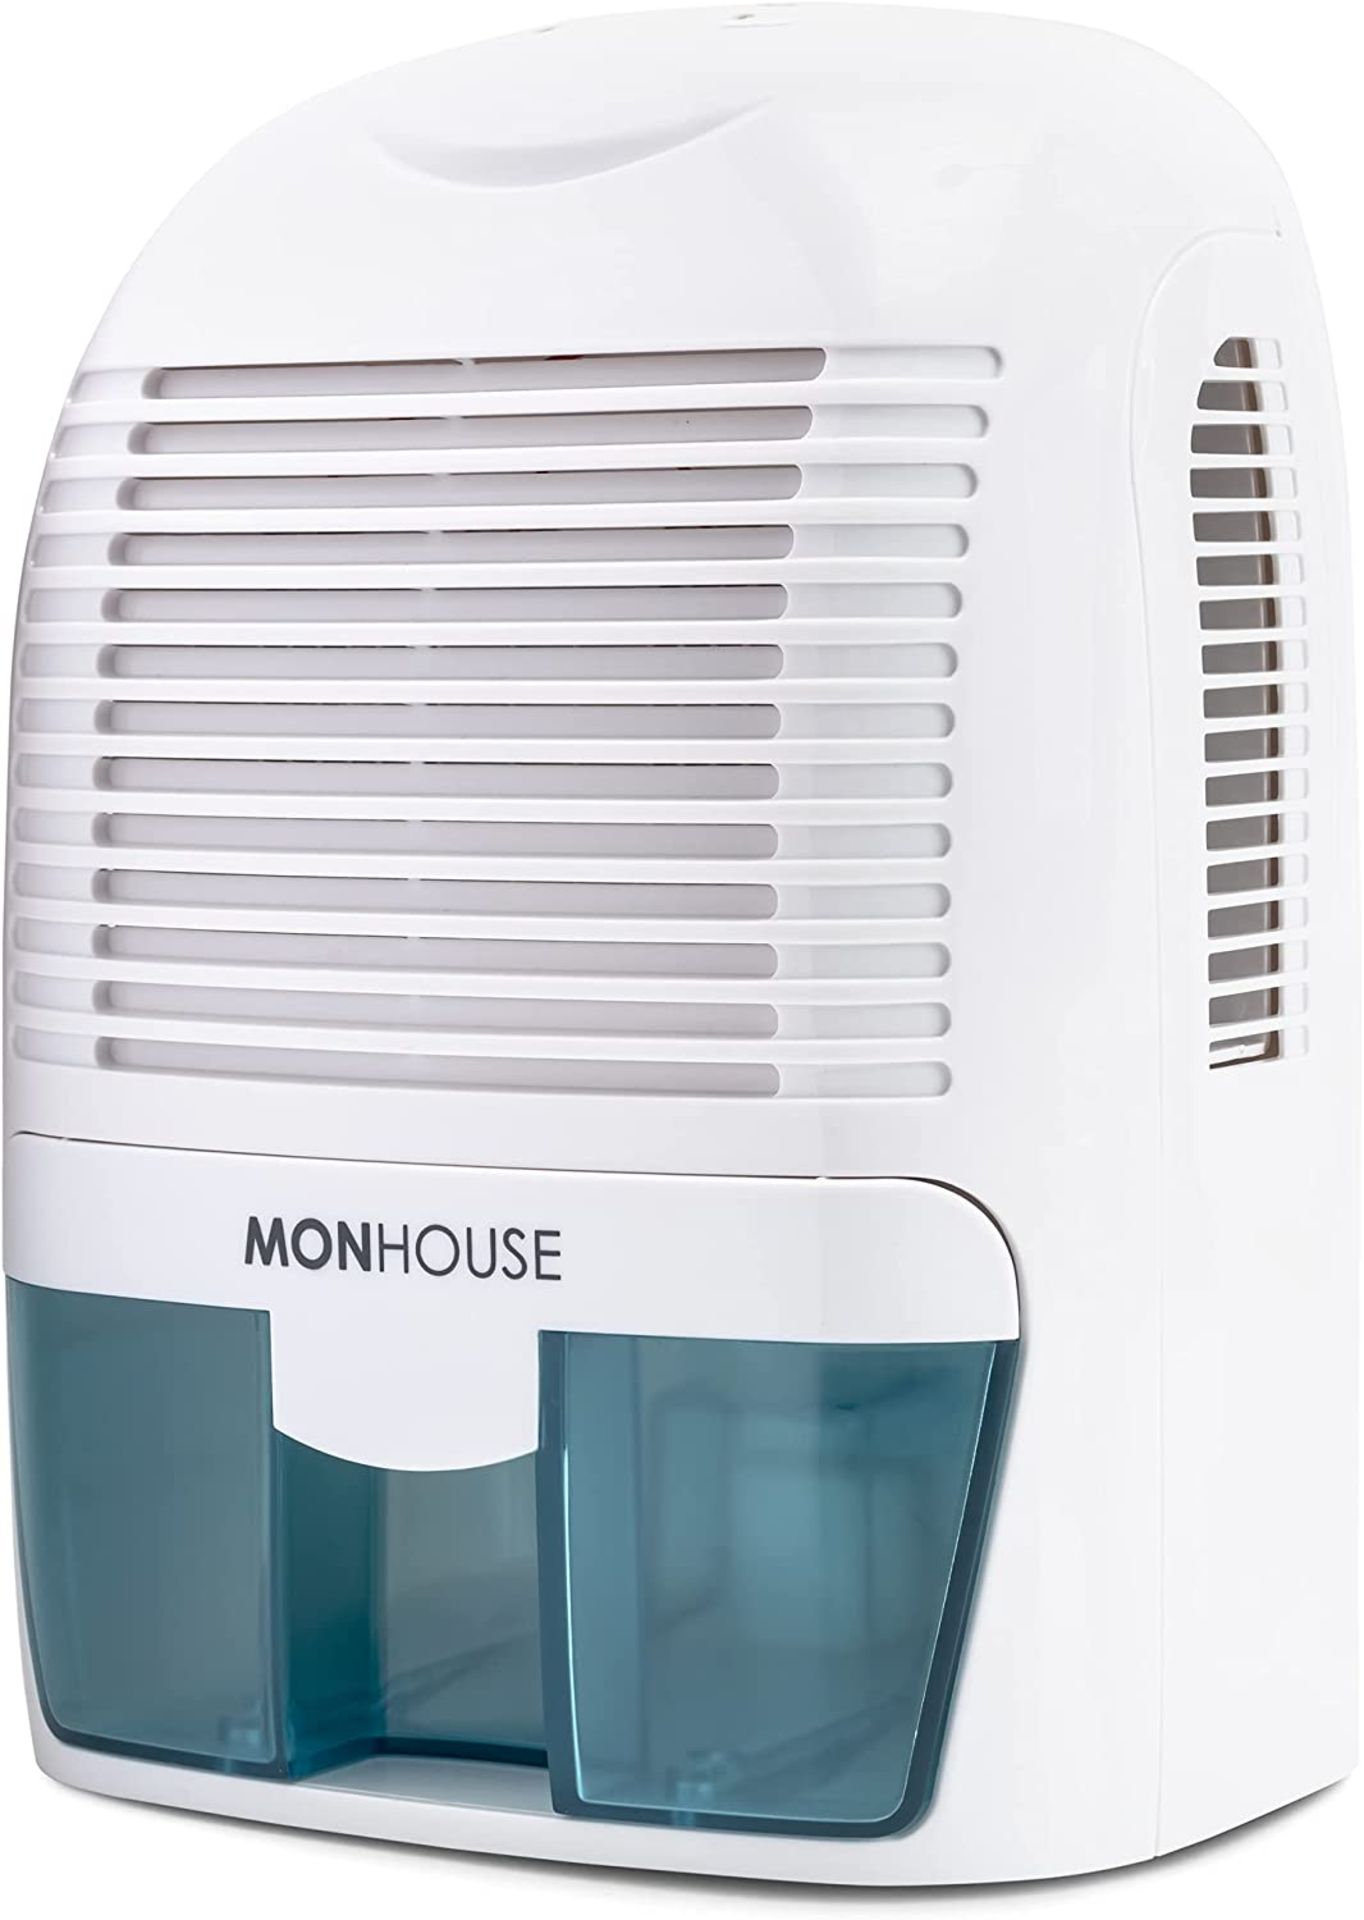 MONHOUSE 1500ML DEHUMIDIFIER RRP £49.99Condition ReportAppraisal Available on Request - All Items